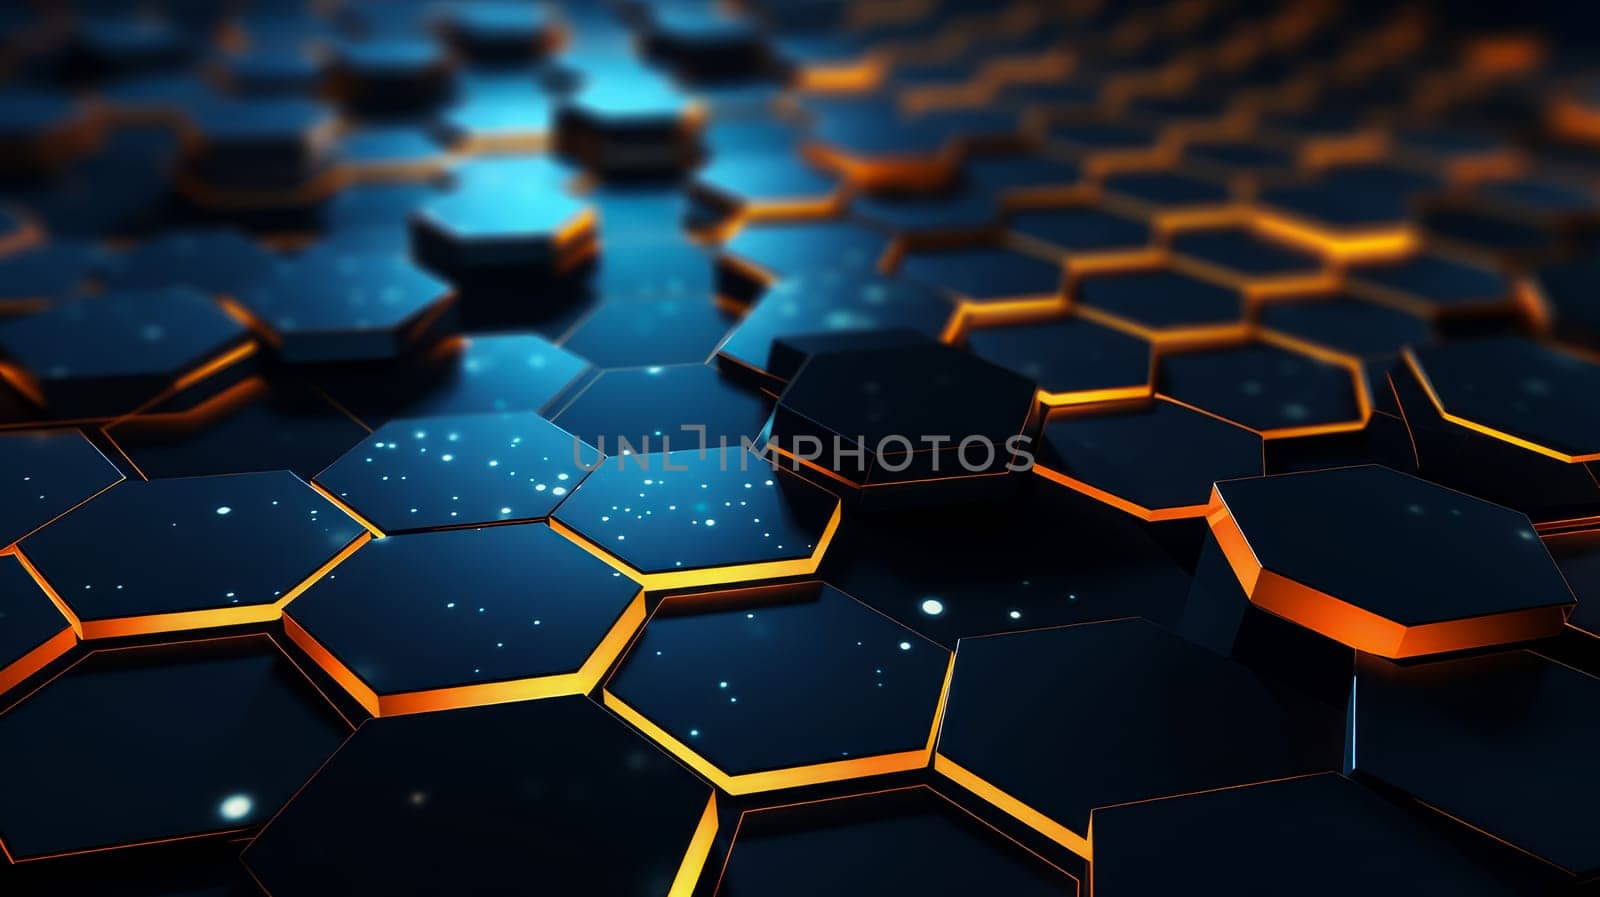 Abstract background with black glowing honeycomb hexagons and fiery orange backlight.